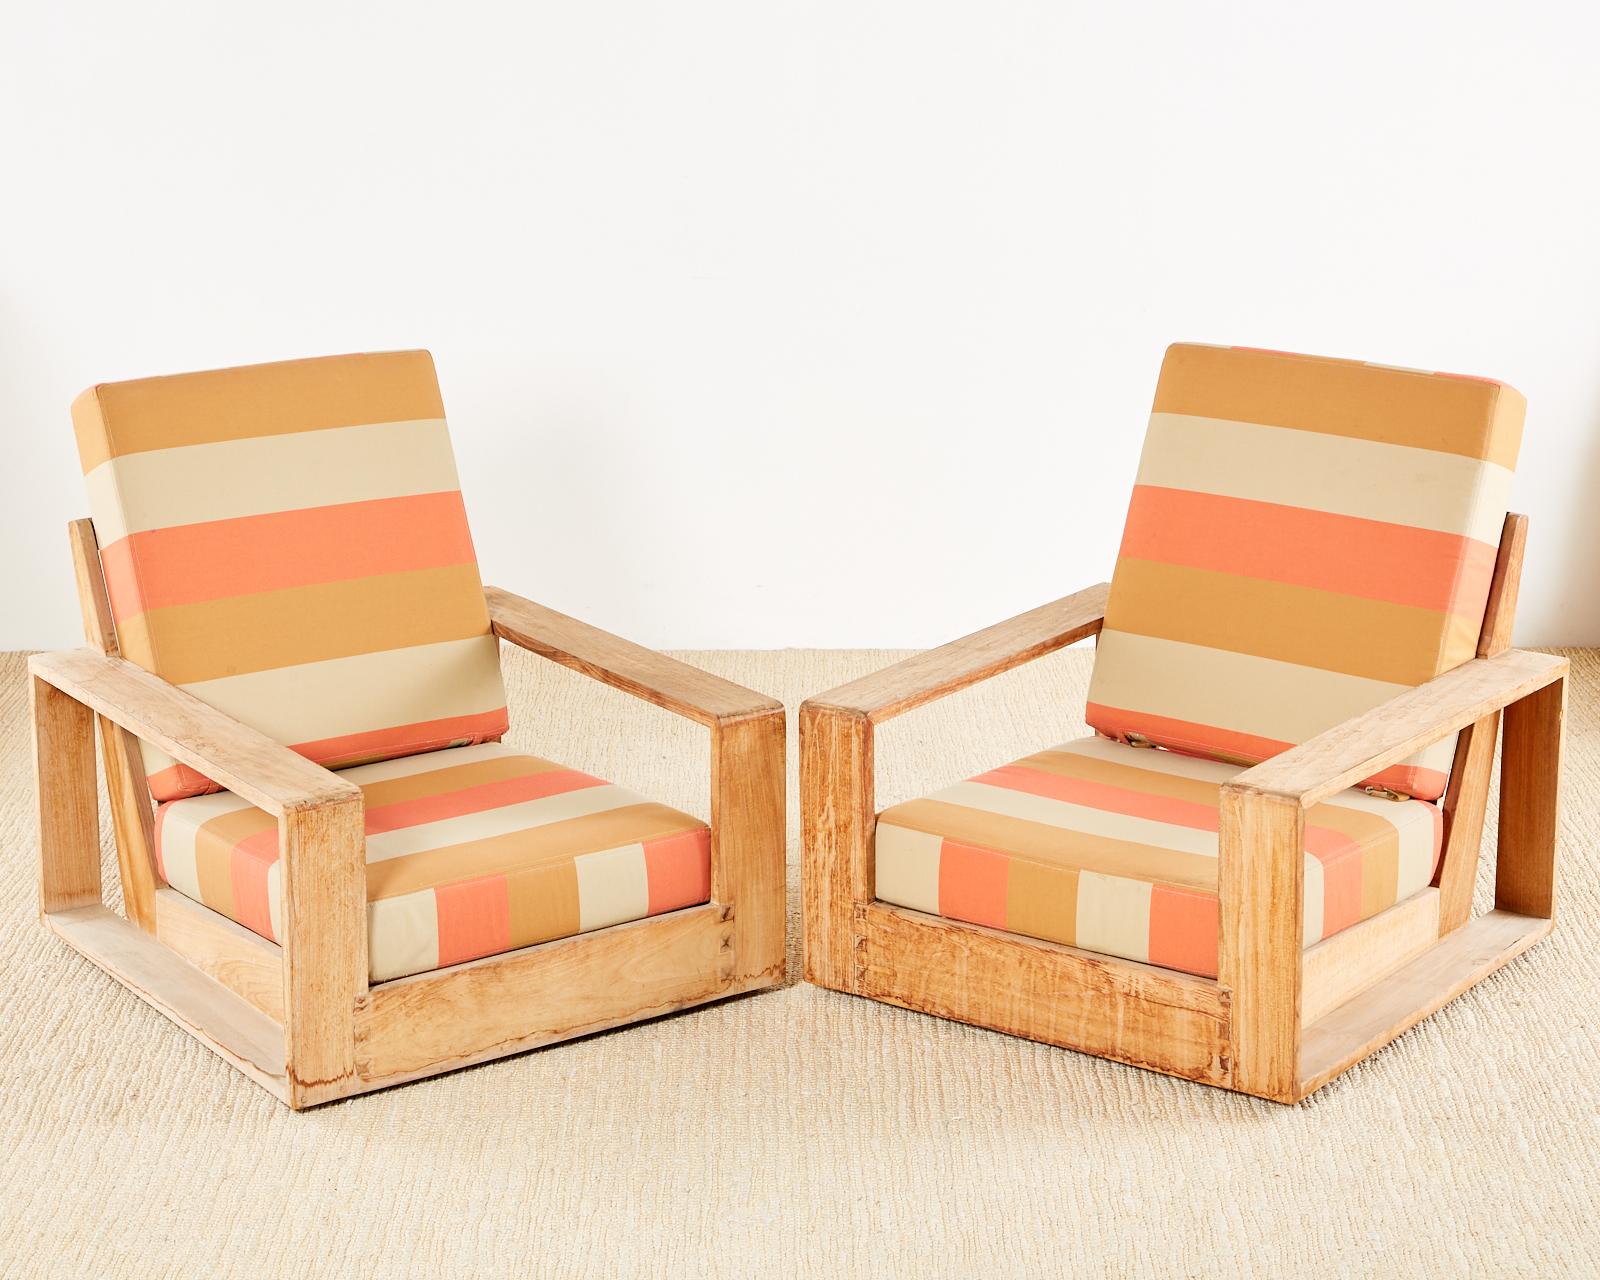 Stylish set of four teak patio poolside lounge chairs designed by John Hutton for Sutherland Furniture. The chairs feature a natural weathered teak finish with bright stripe upholstery in an all weather fabric. Set consists of two generous armchairs